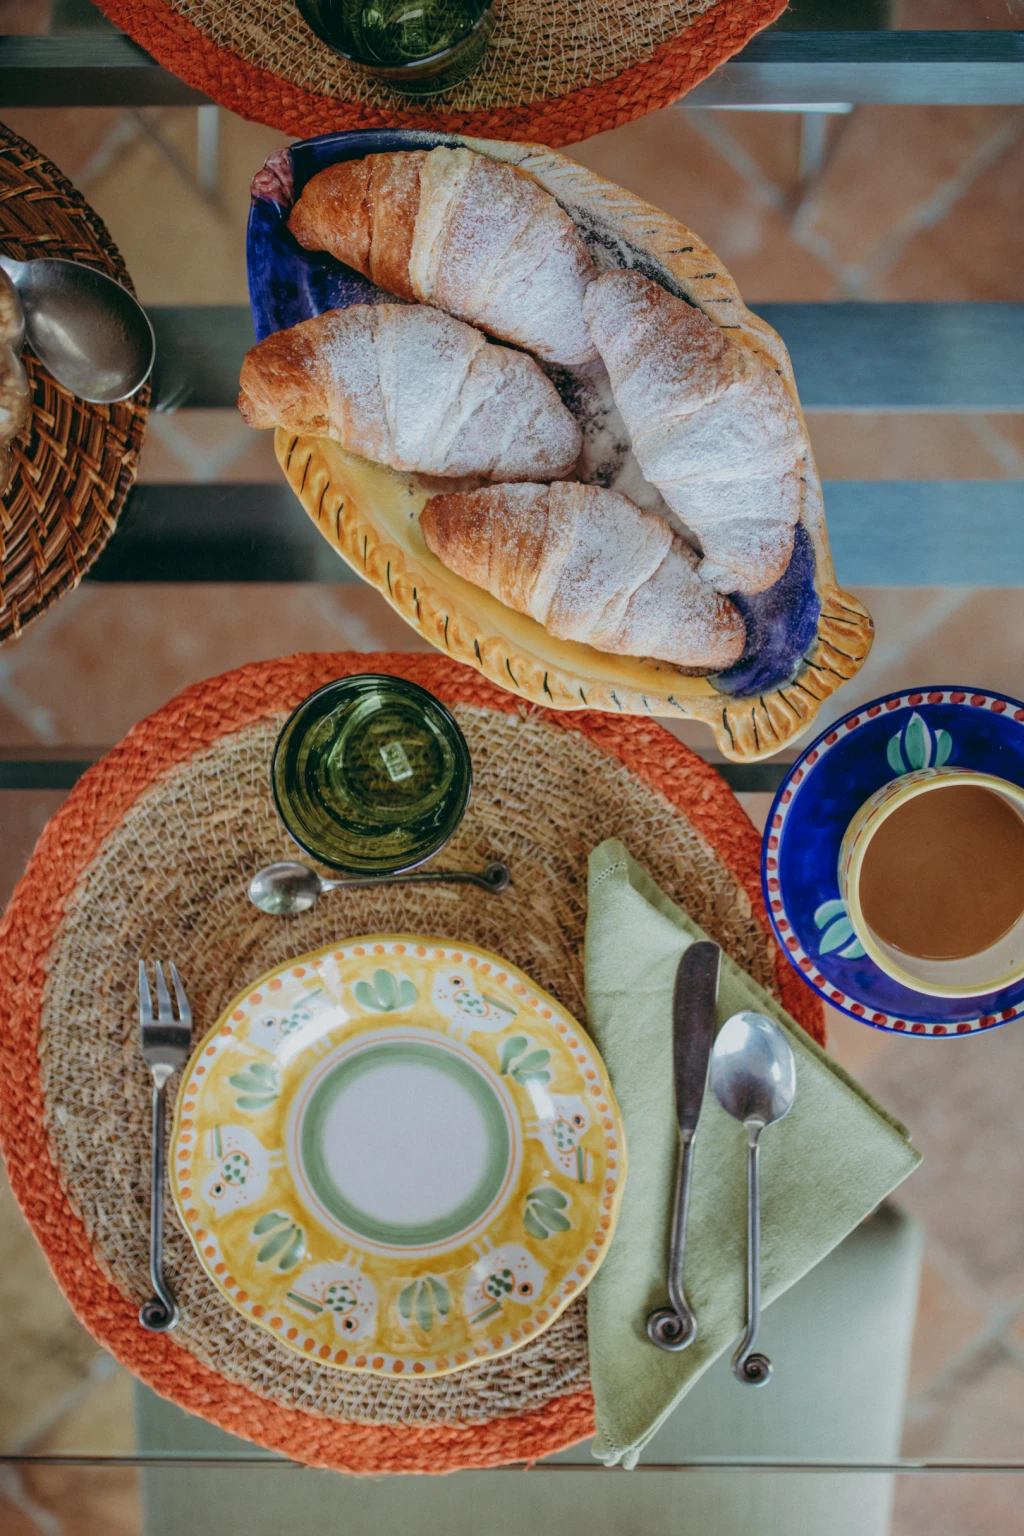 The villa is fully staffed, in the morning a delicious breakfast is served in the dining room or one of the terraces overlooking the Amalfi Coast